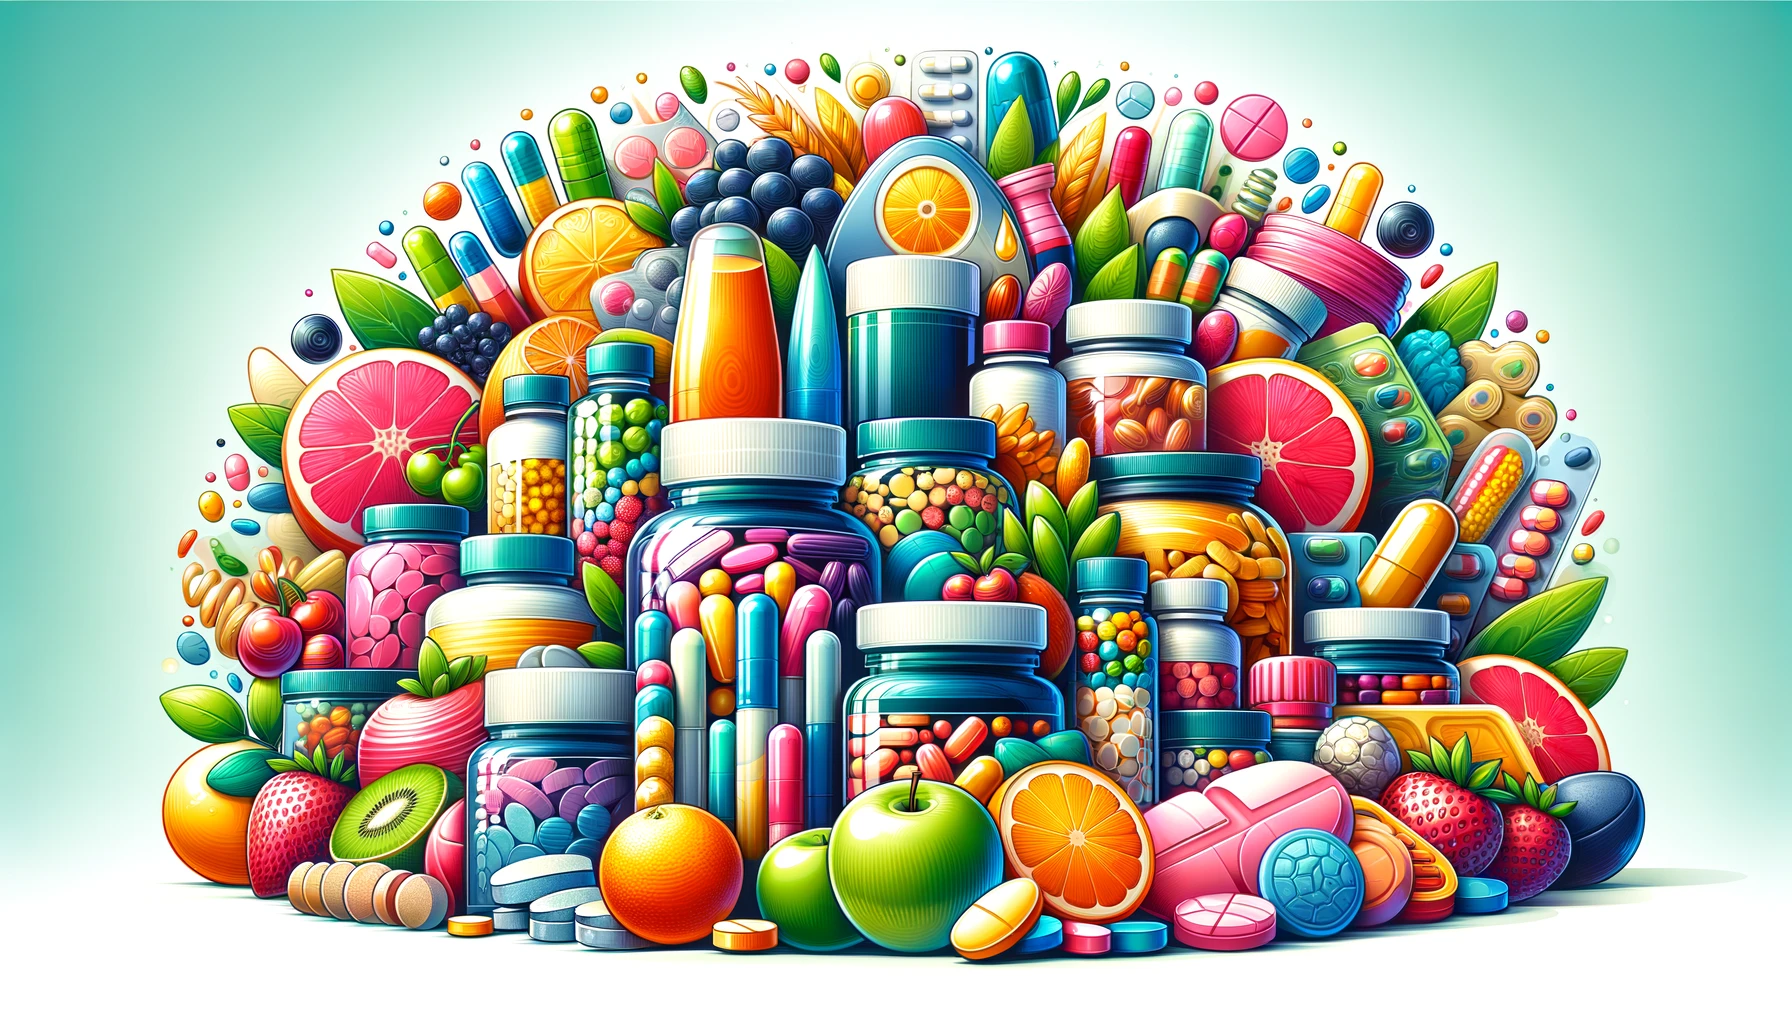 Colorful illustration of various dietary supplements including vitamins and minerals, as part of the Healthy Life - New Start's exploration of health supplements.